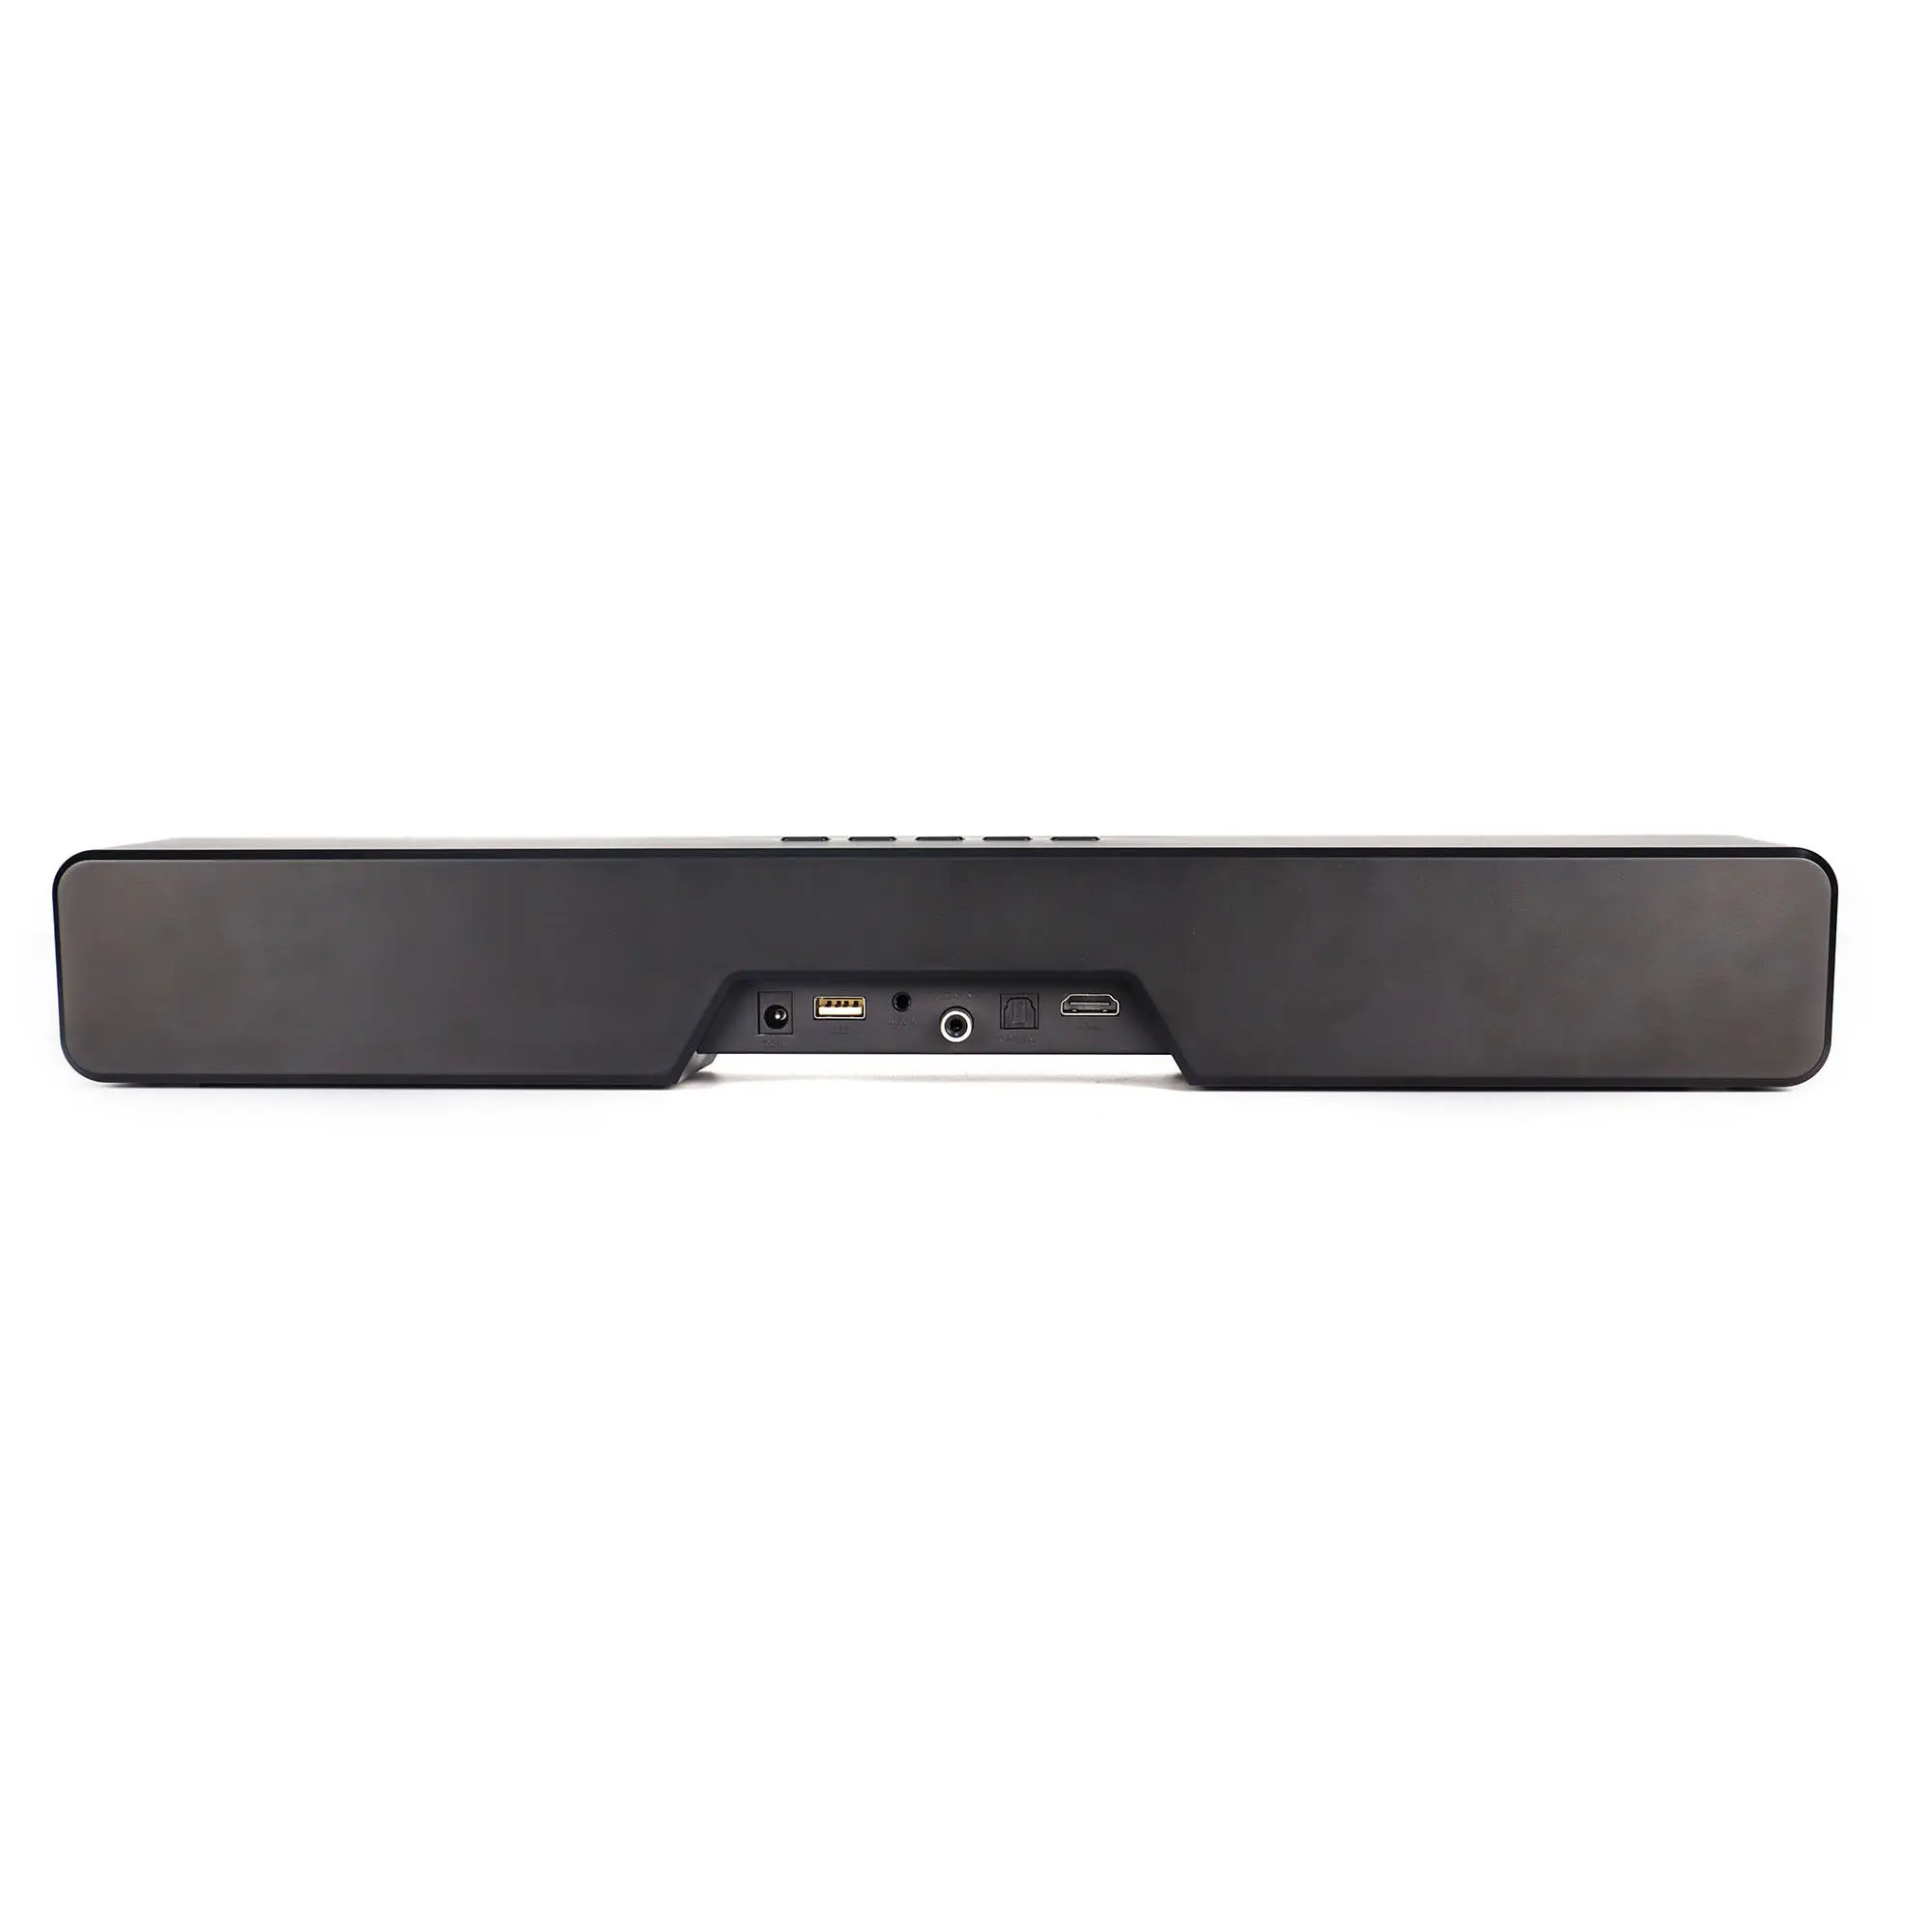 Microlab New product blue tooth Soundbar Onebar 02 with remote control USB Optical coaxial